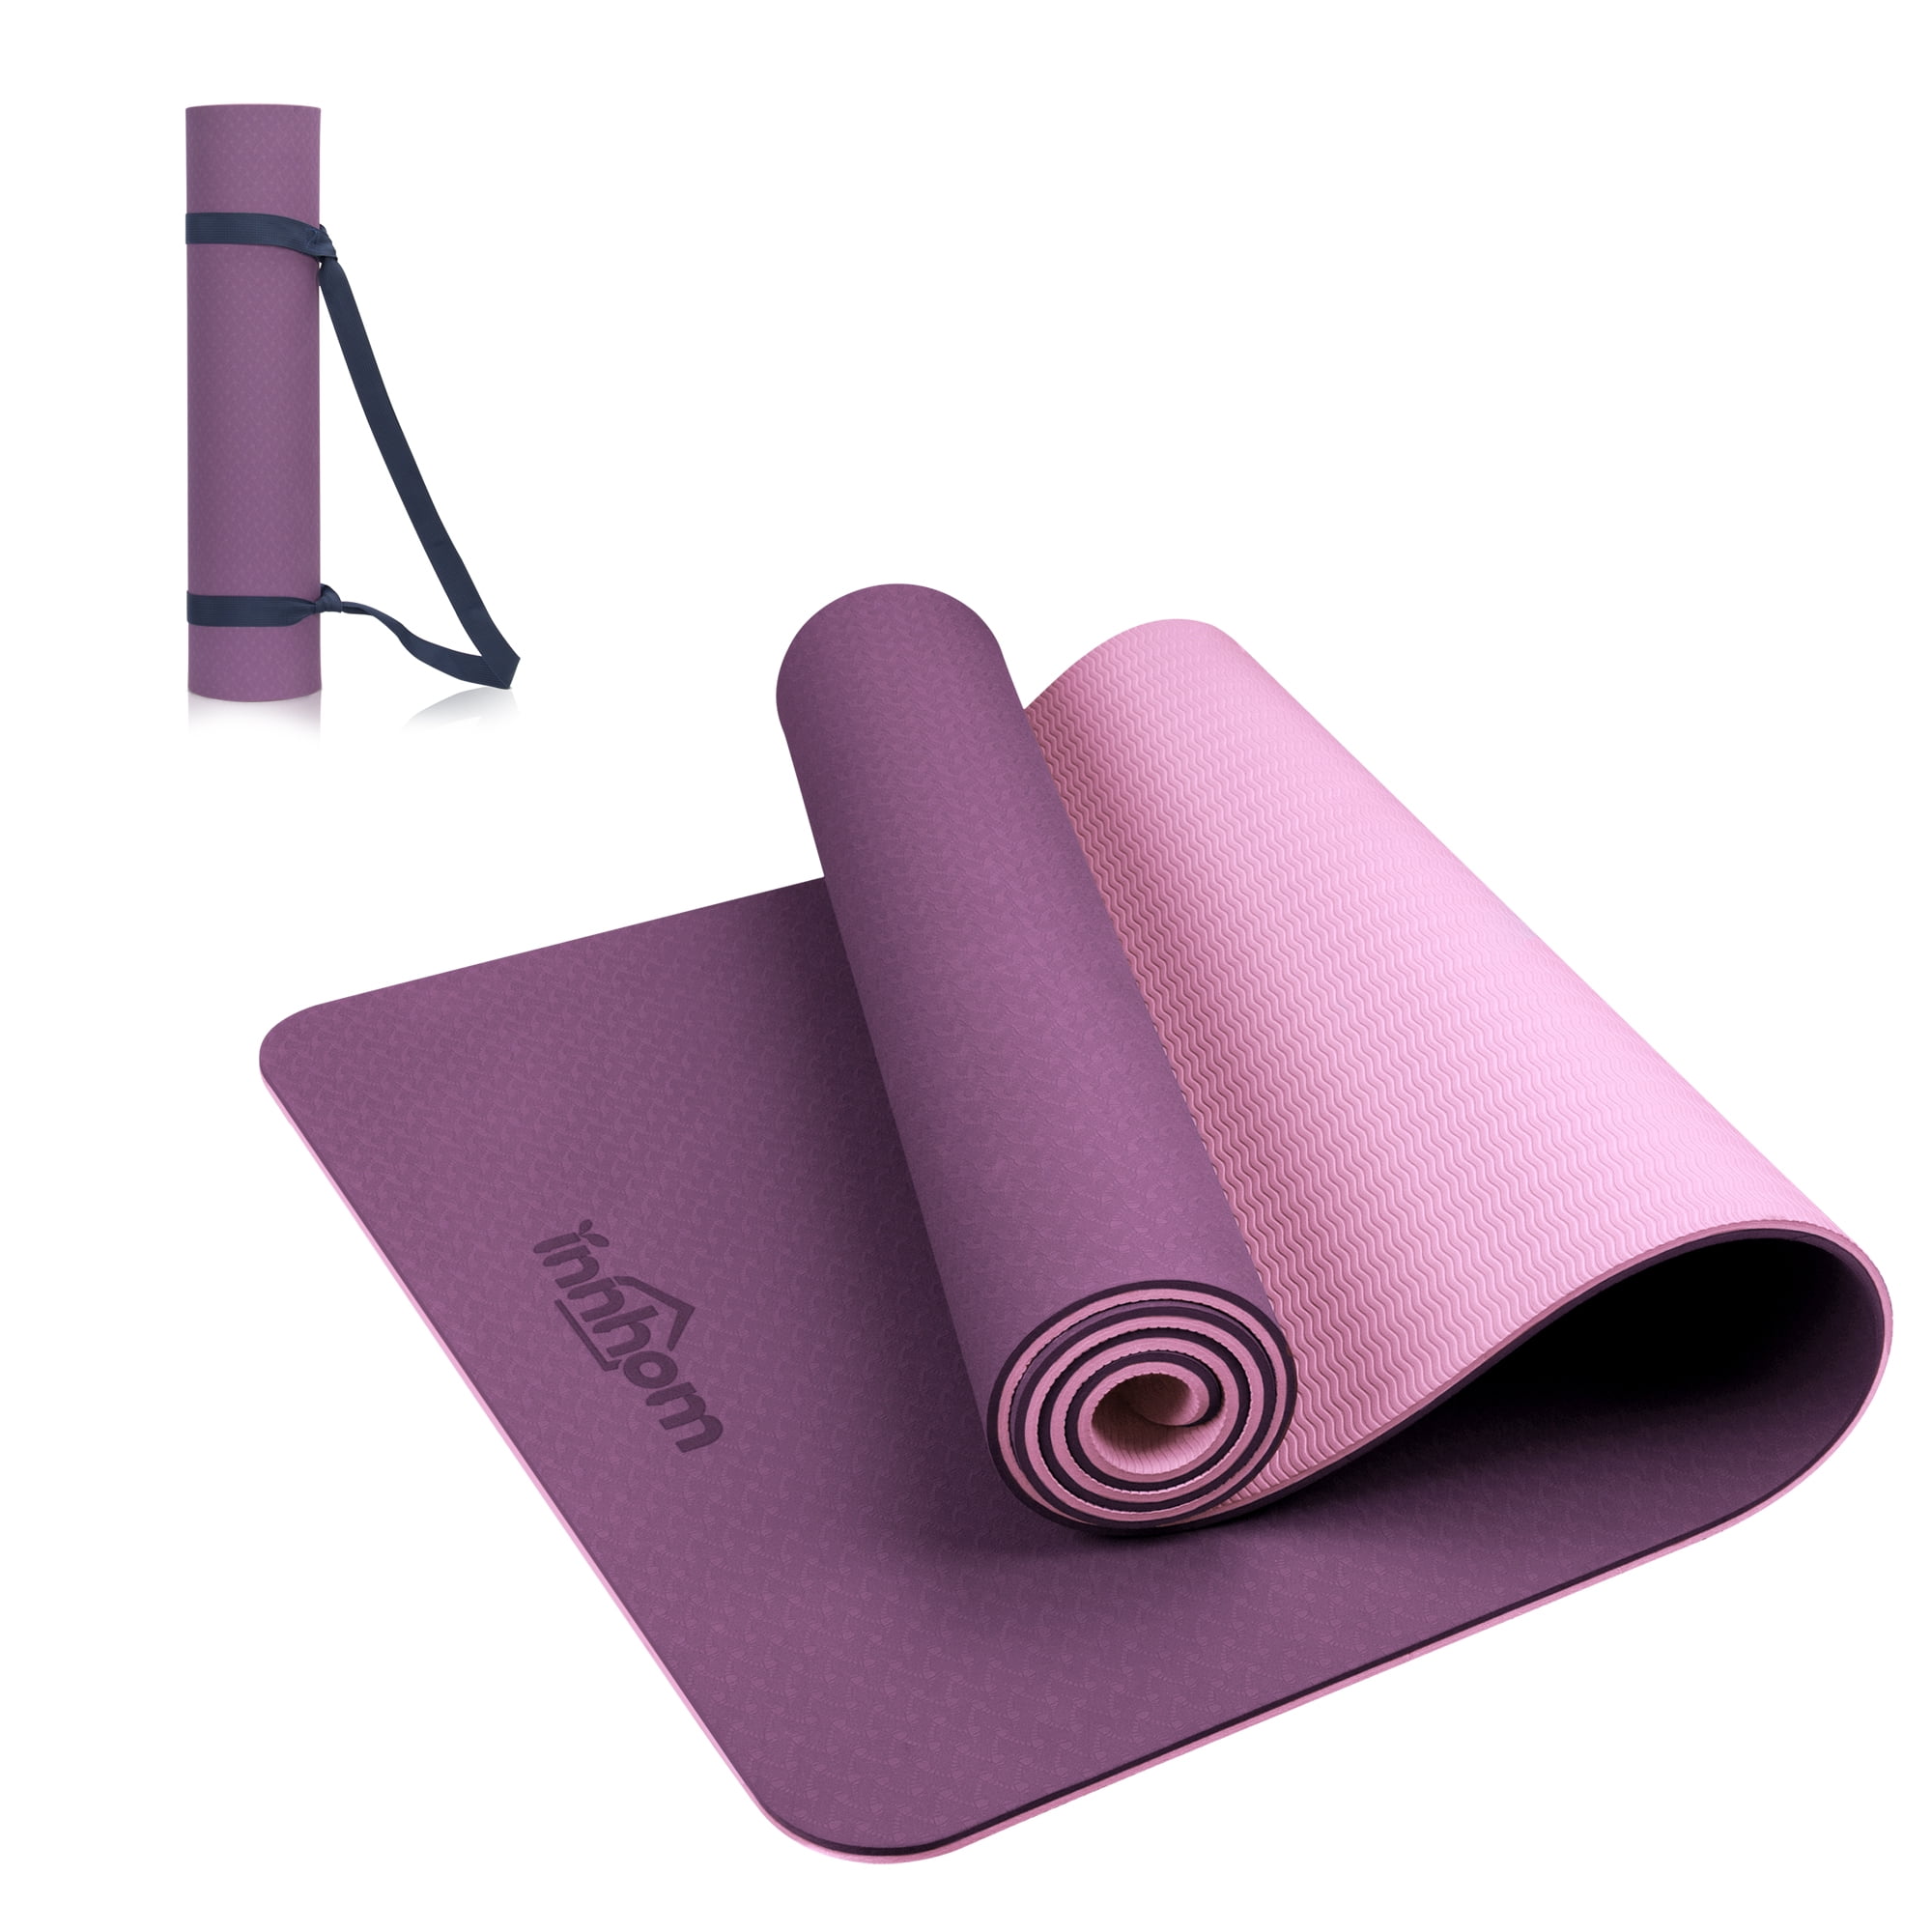 Buy Stag Iconic Yoga Mat Series, Premium Anti-Slip Thick Mats for  Cushioning Support and Stability in Yoga, Pilates, Gym and Home Workout  Ideal for Men & Women